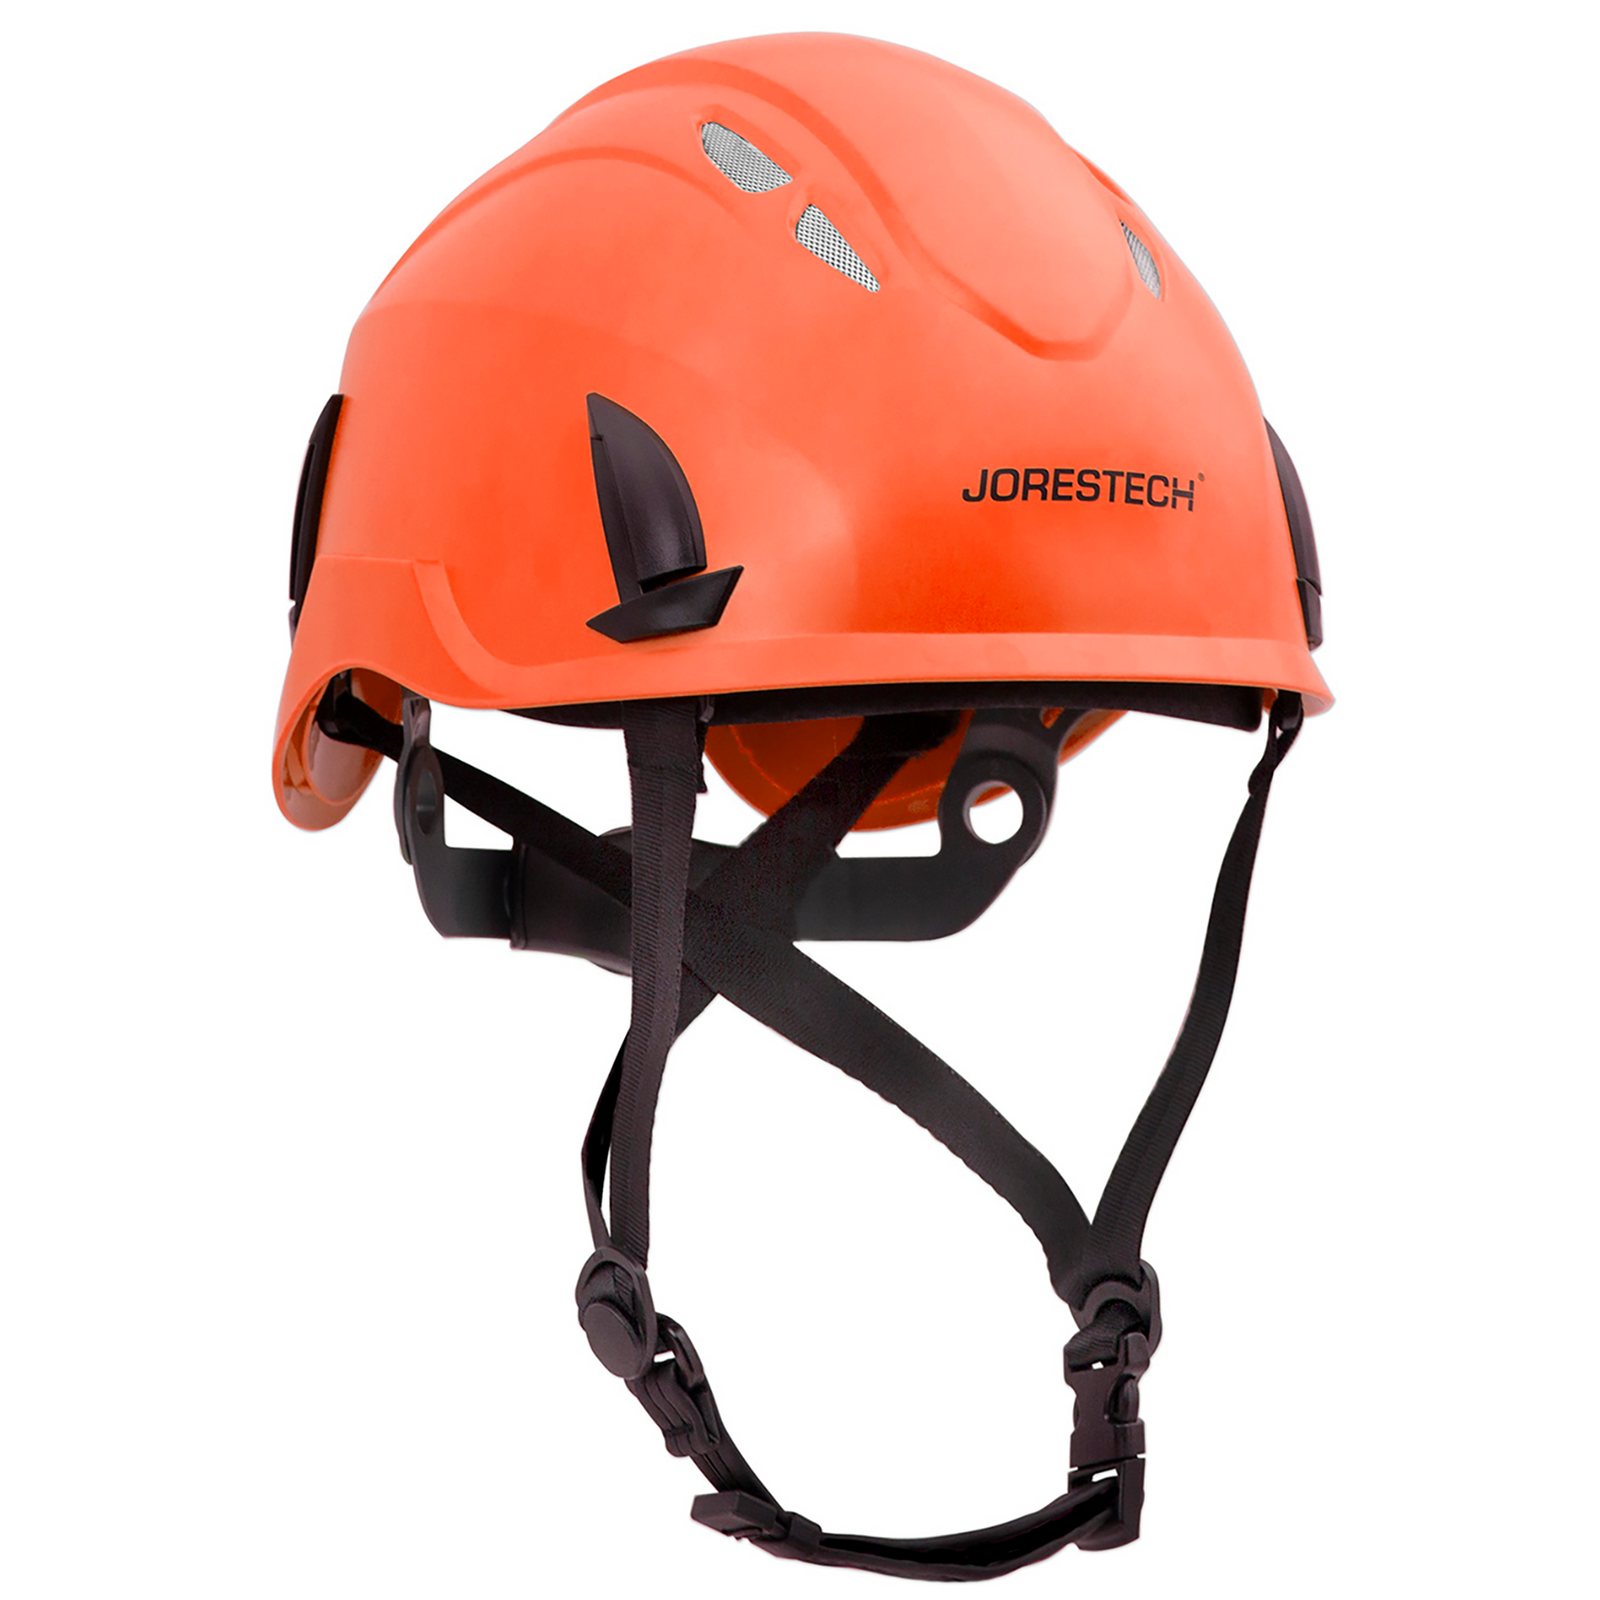 Diagonal view of the orange Ventilated work at height JORESTECH® hard hat with anti intrusion grille and adjustable 4 point suspension with chin strap